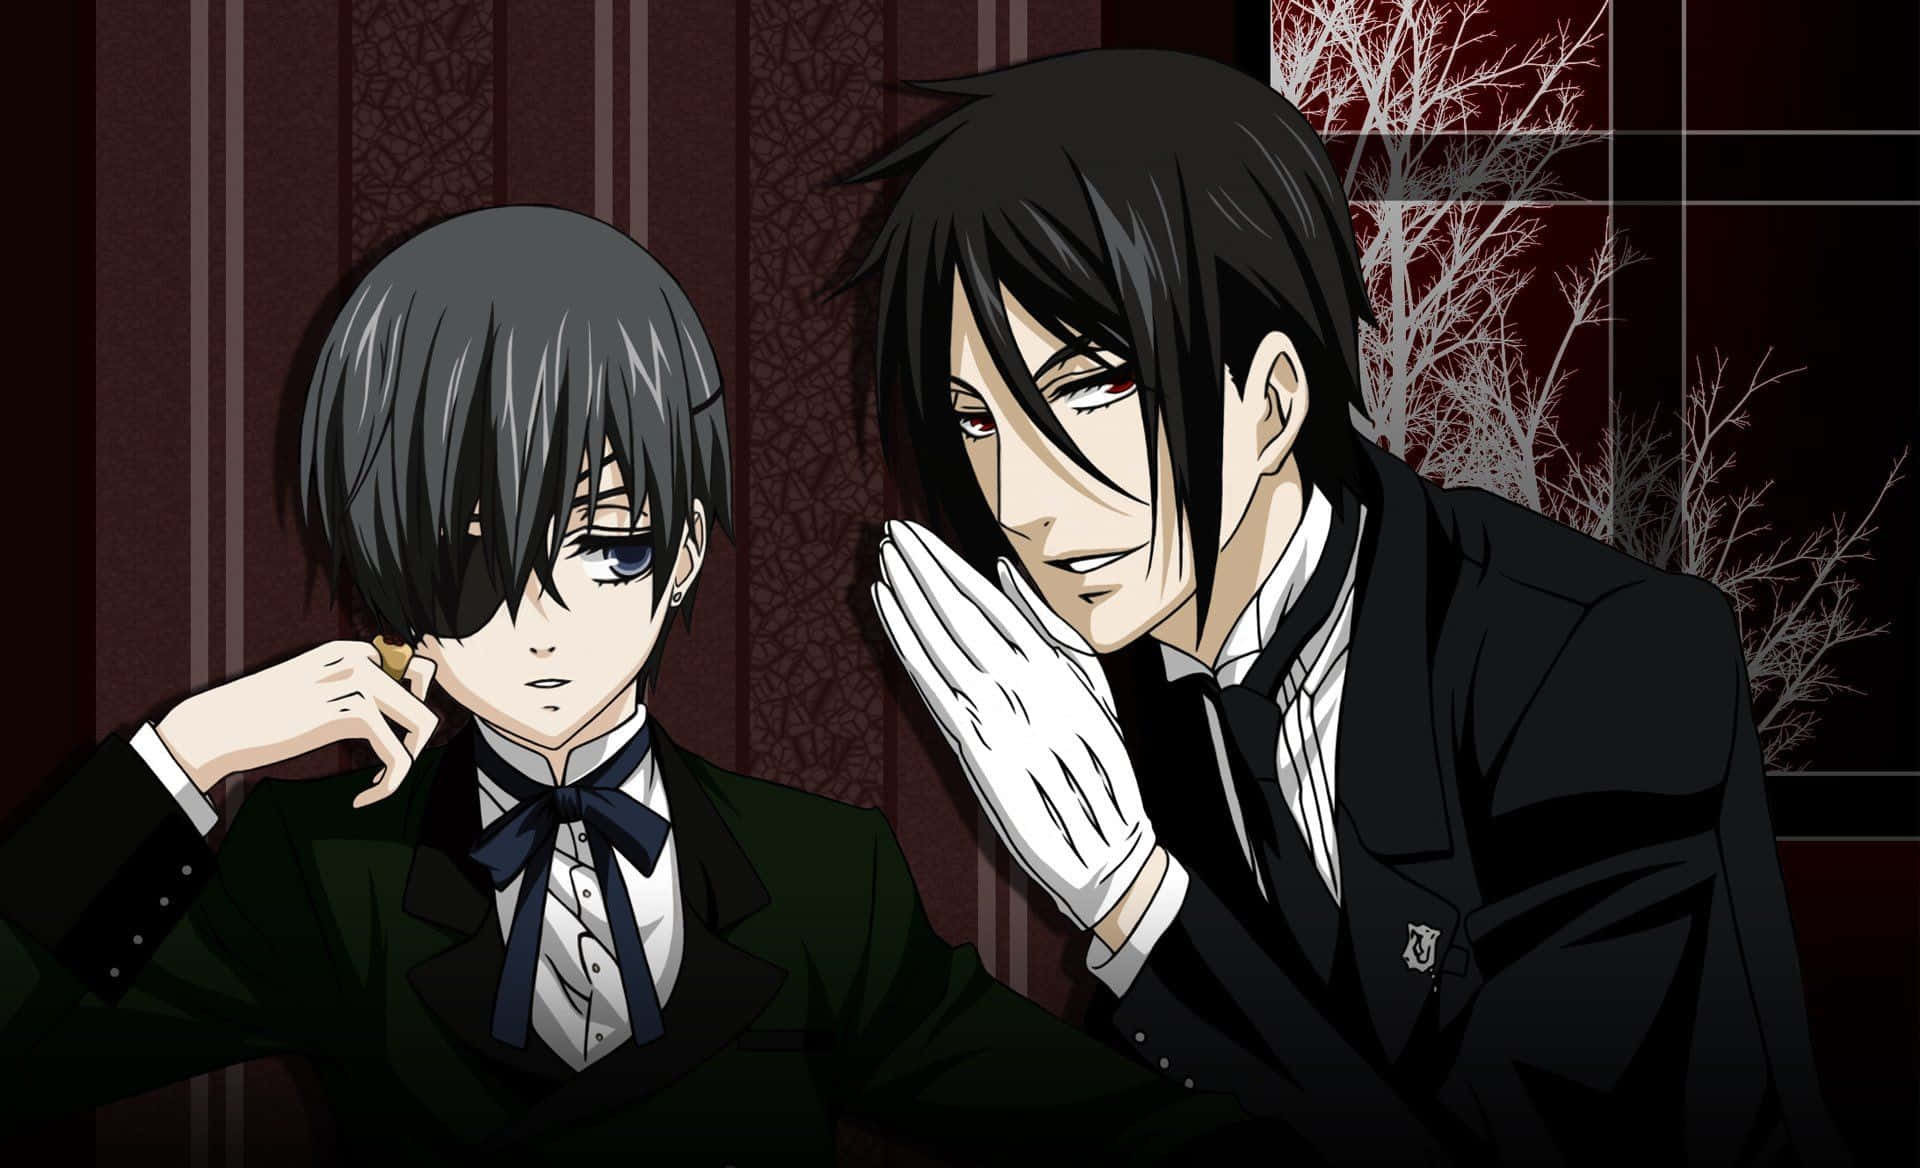 Welcome to the dark and mysterious world of Black Butler